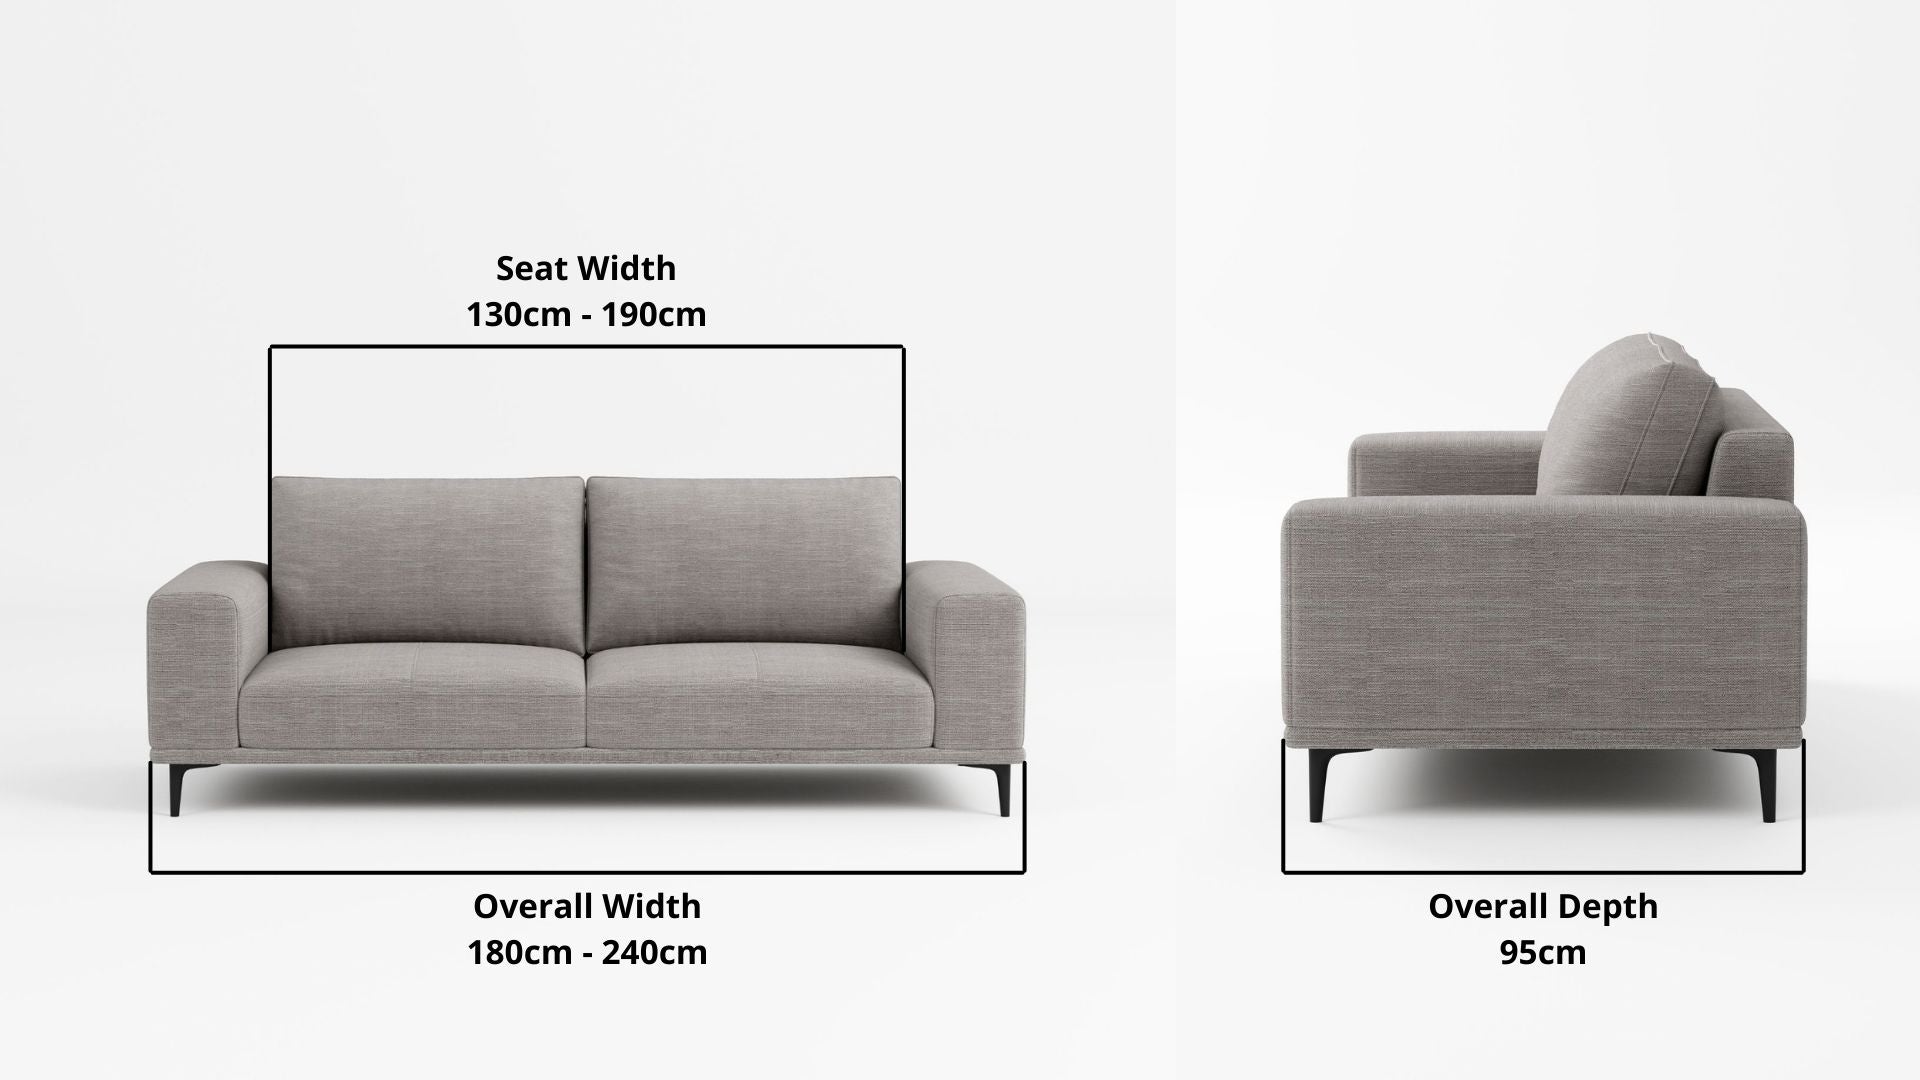 Details the key dimensions in terms of overall width, overall depth and seat width for Calm Fabric Sofa